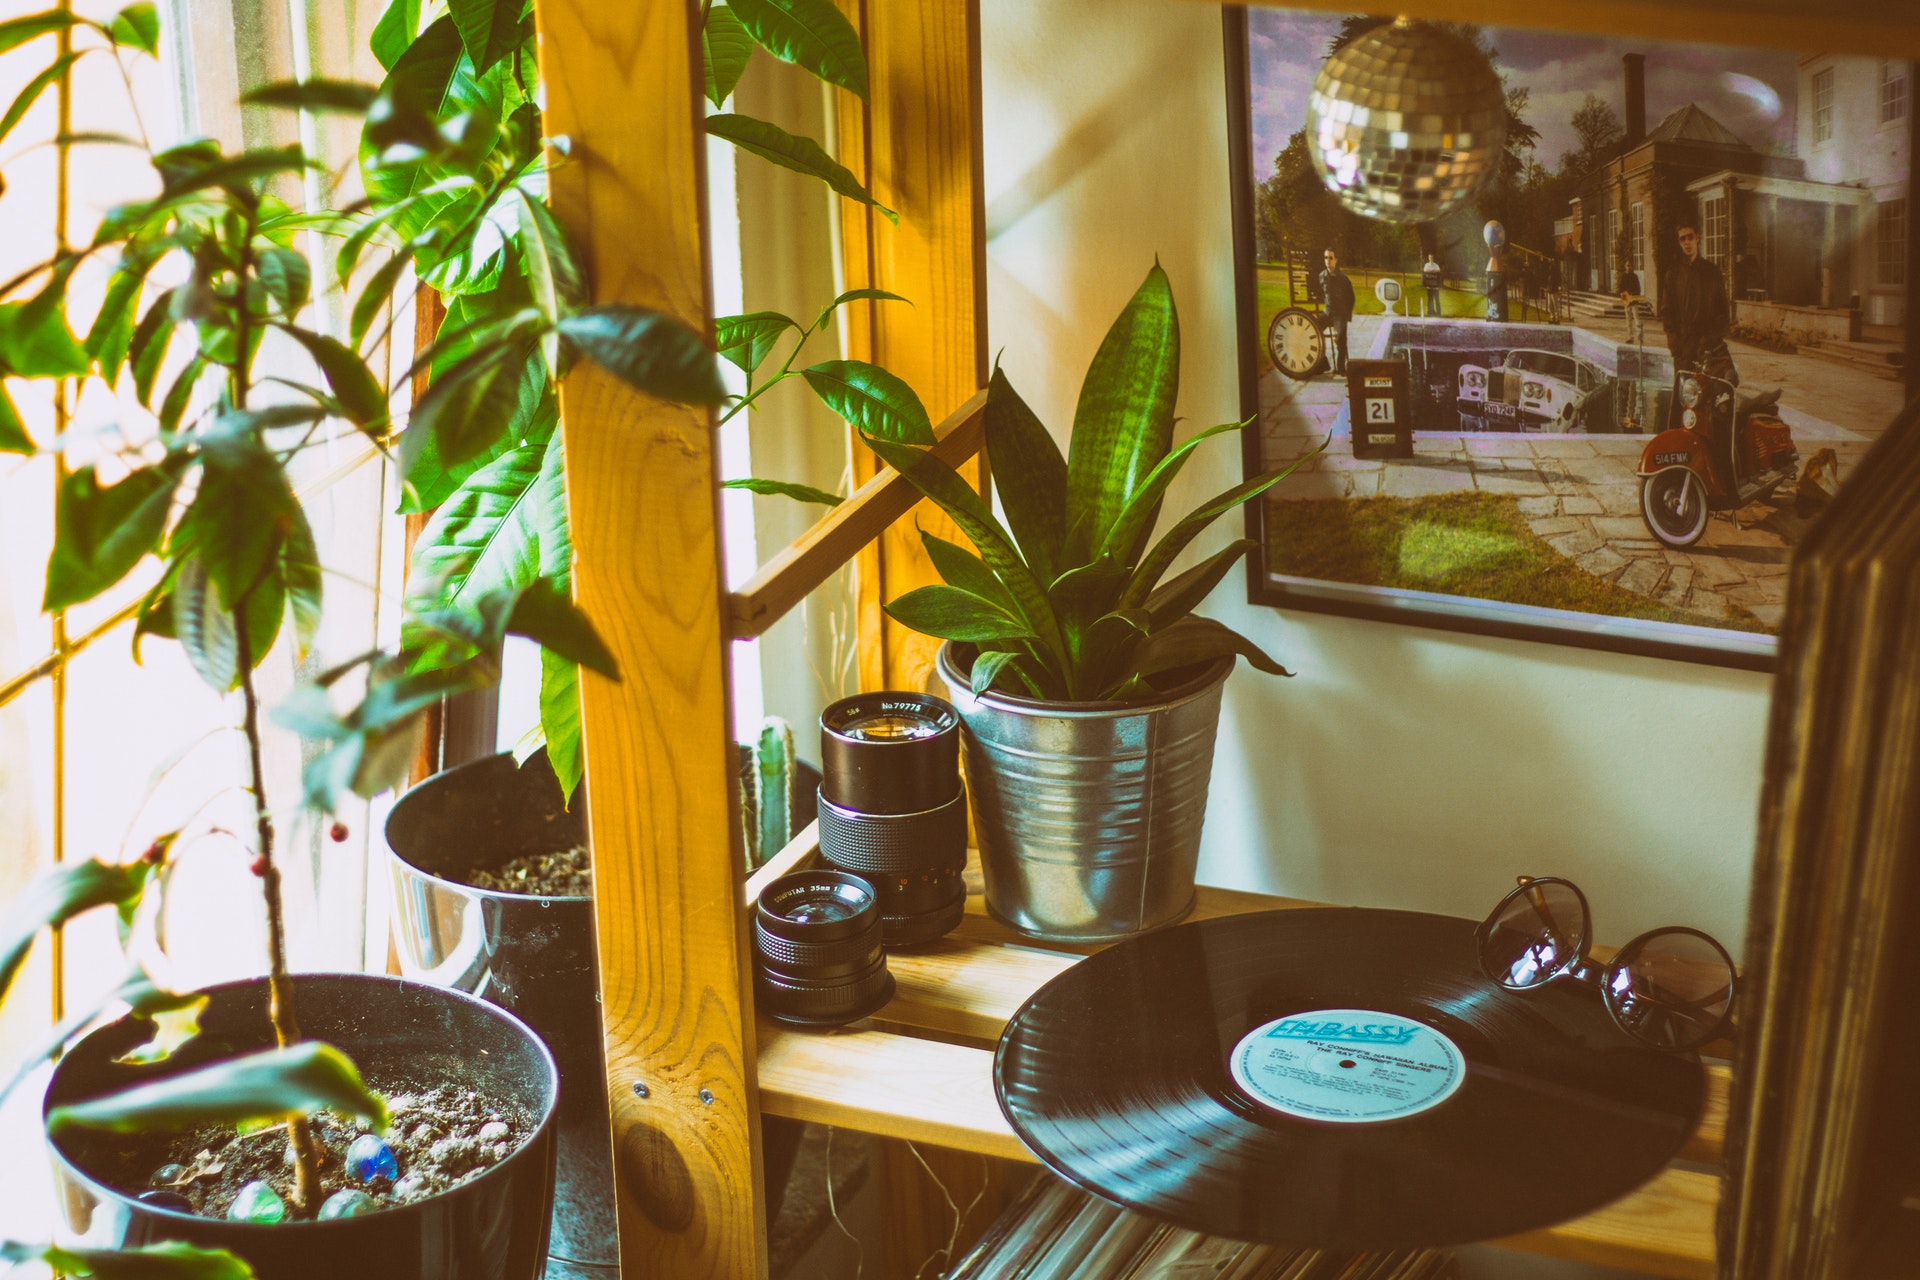 A vinyl record sitting on a shelf next to several house plants.